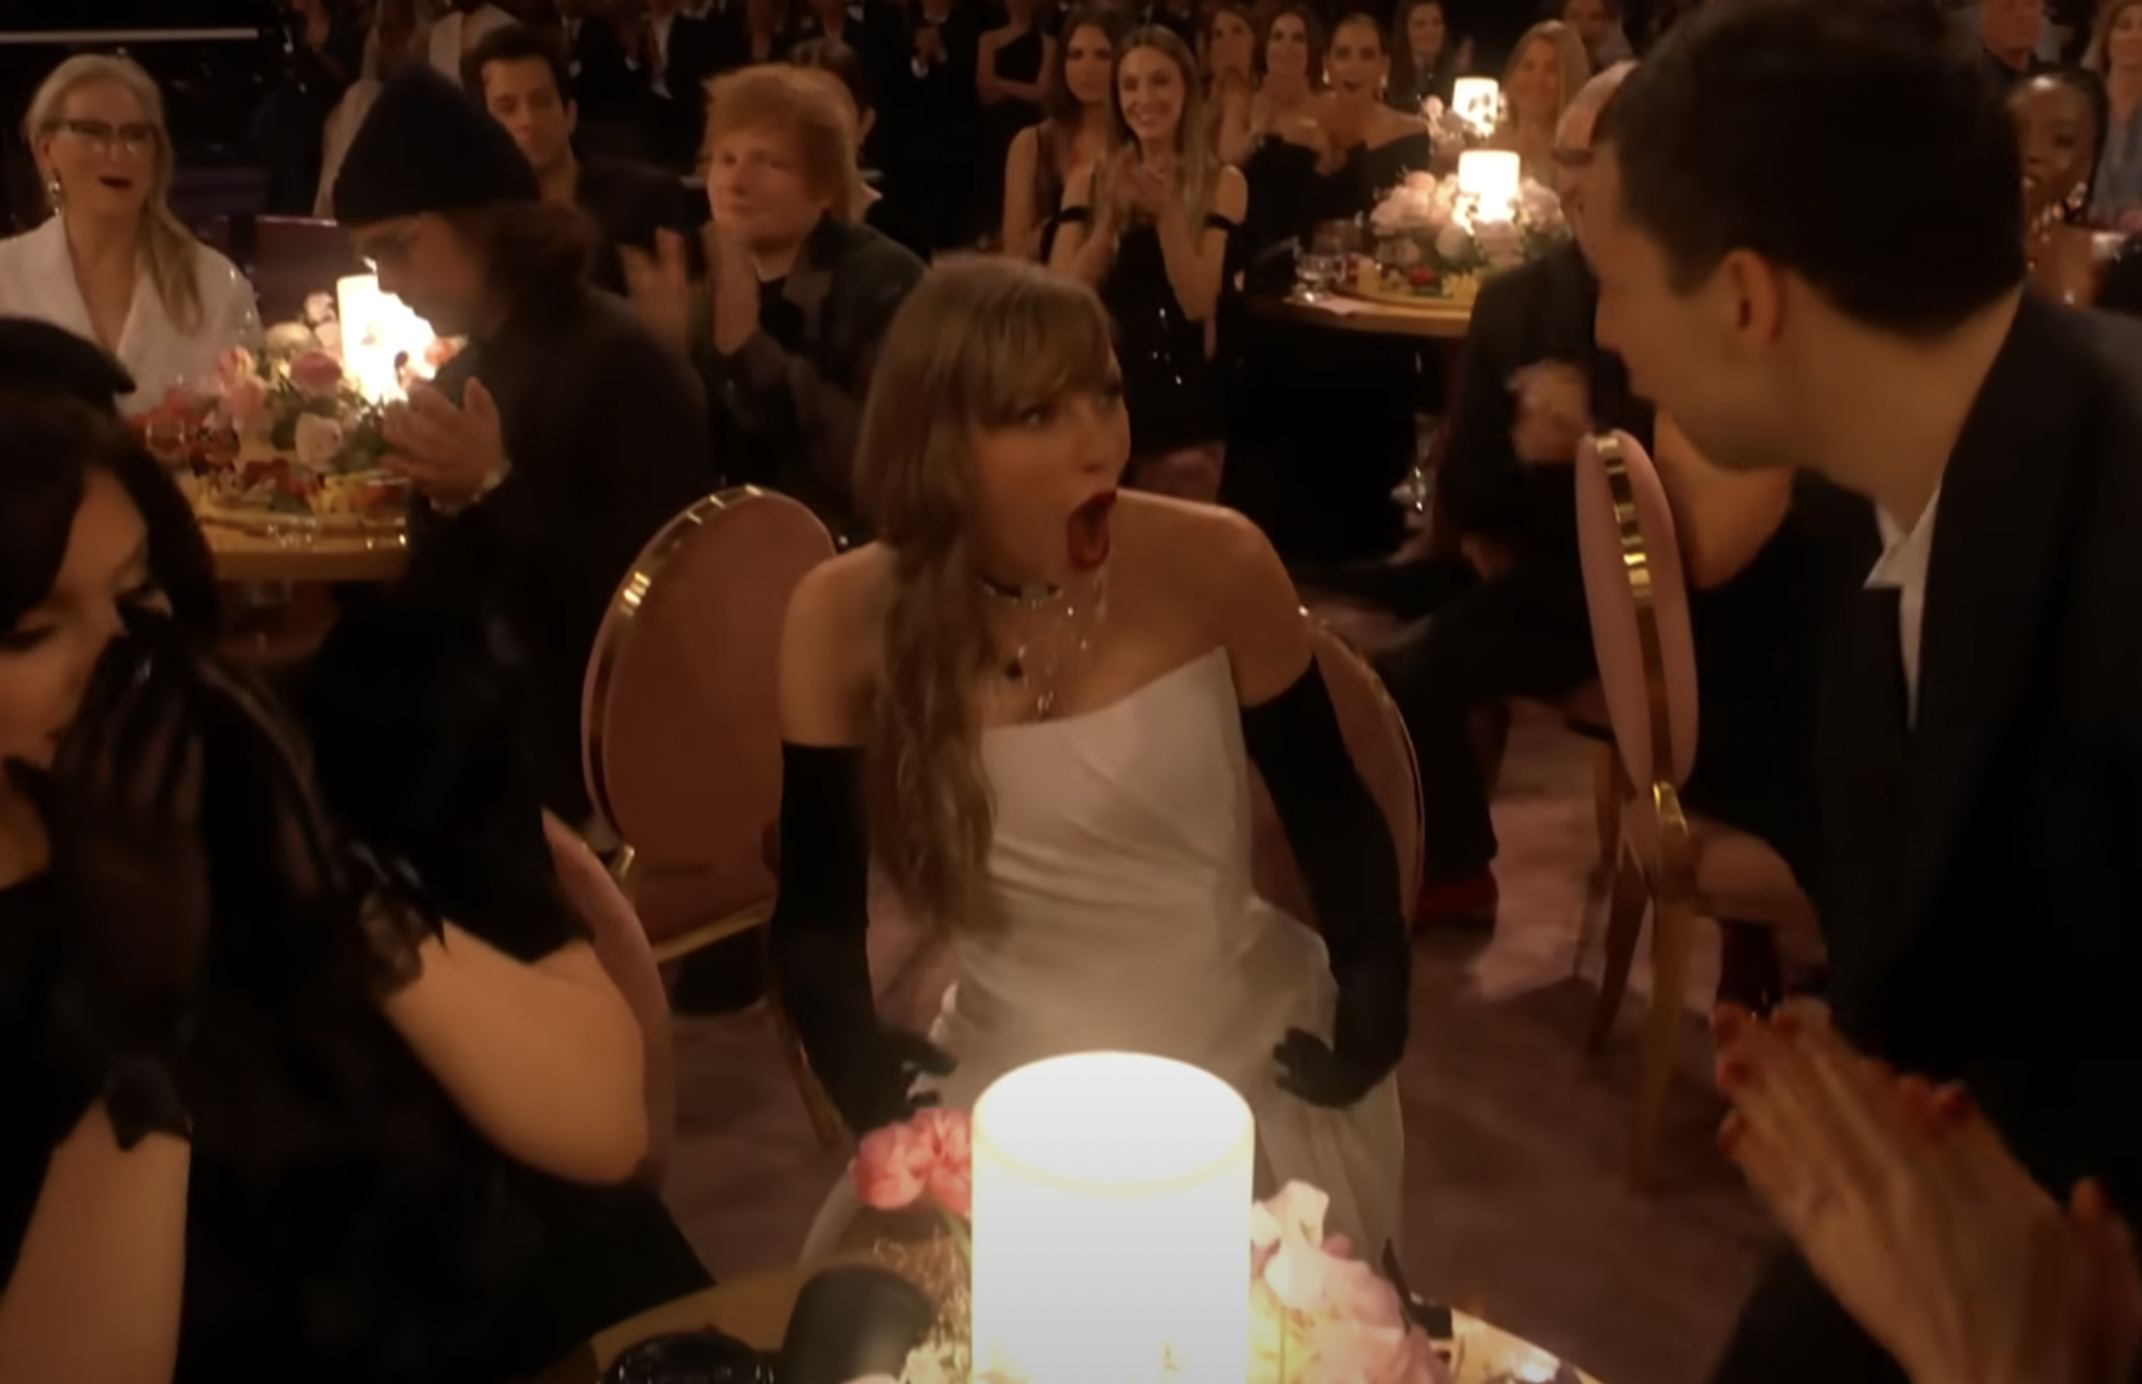 Taylor Swift walked right past ex Calvin Harris at the Grammys — here’s how he reacted